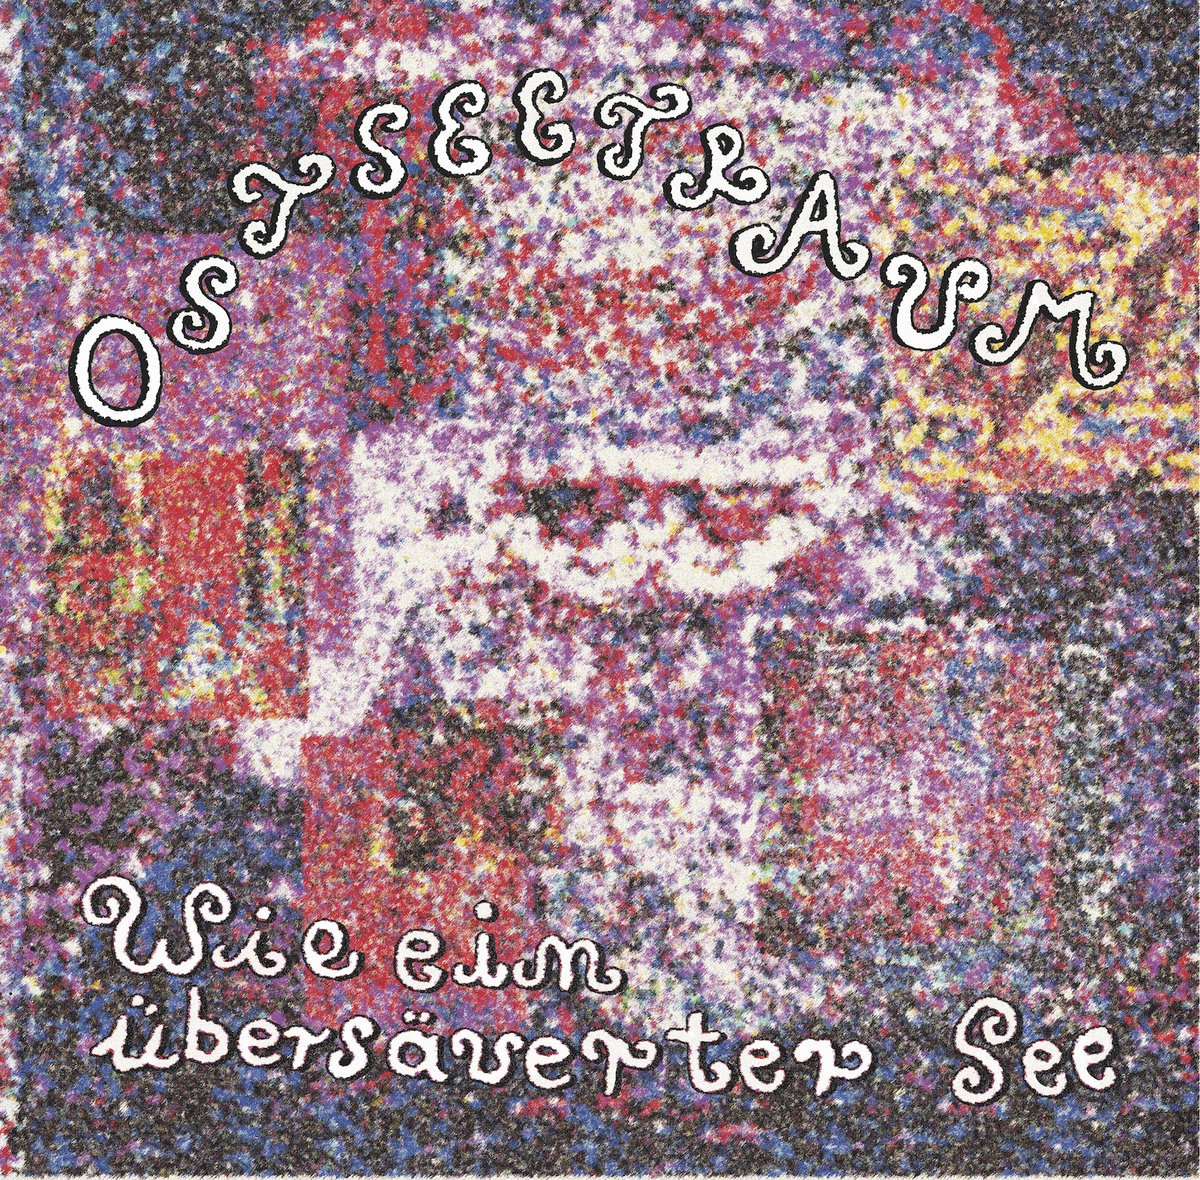 Ostseetraum – Wie Ein Übersäuerter See LP (Mangel) <p>Ostseetraums second full length is finally available. 11 new tracks of minimal lo-fi synth pop reminiscent of early Zick Zack stuff. 11 tracks that combine dubby baselines, quirky synths, driving rhythms, touching melodies, abstract texting on low fi recording.
Wie Ein Übersäuerter See by Ostseetraum</p>